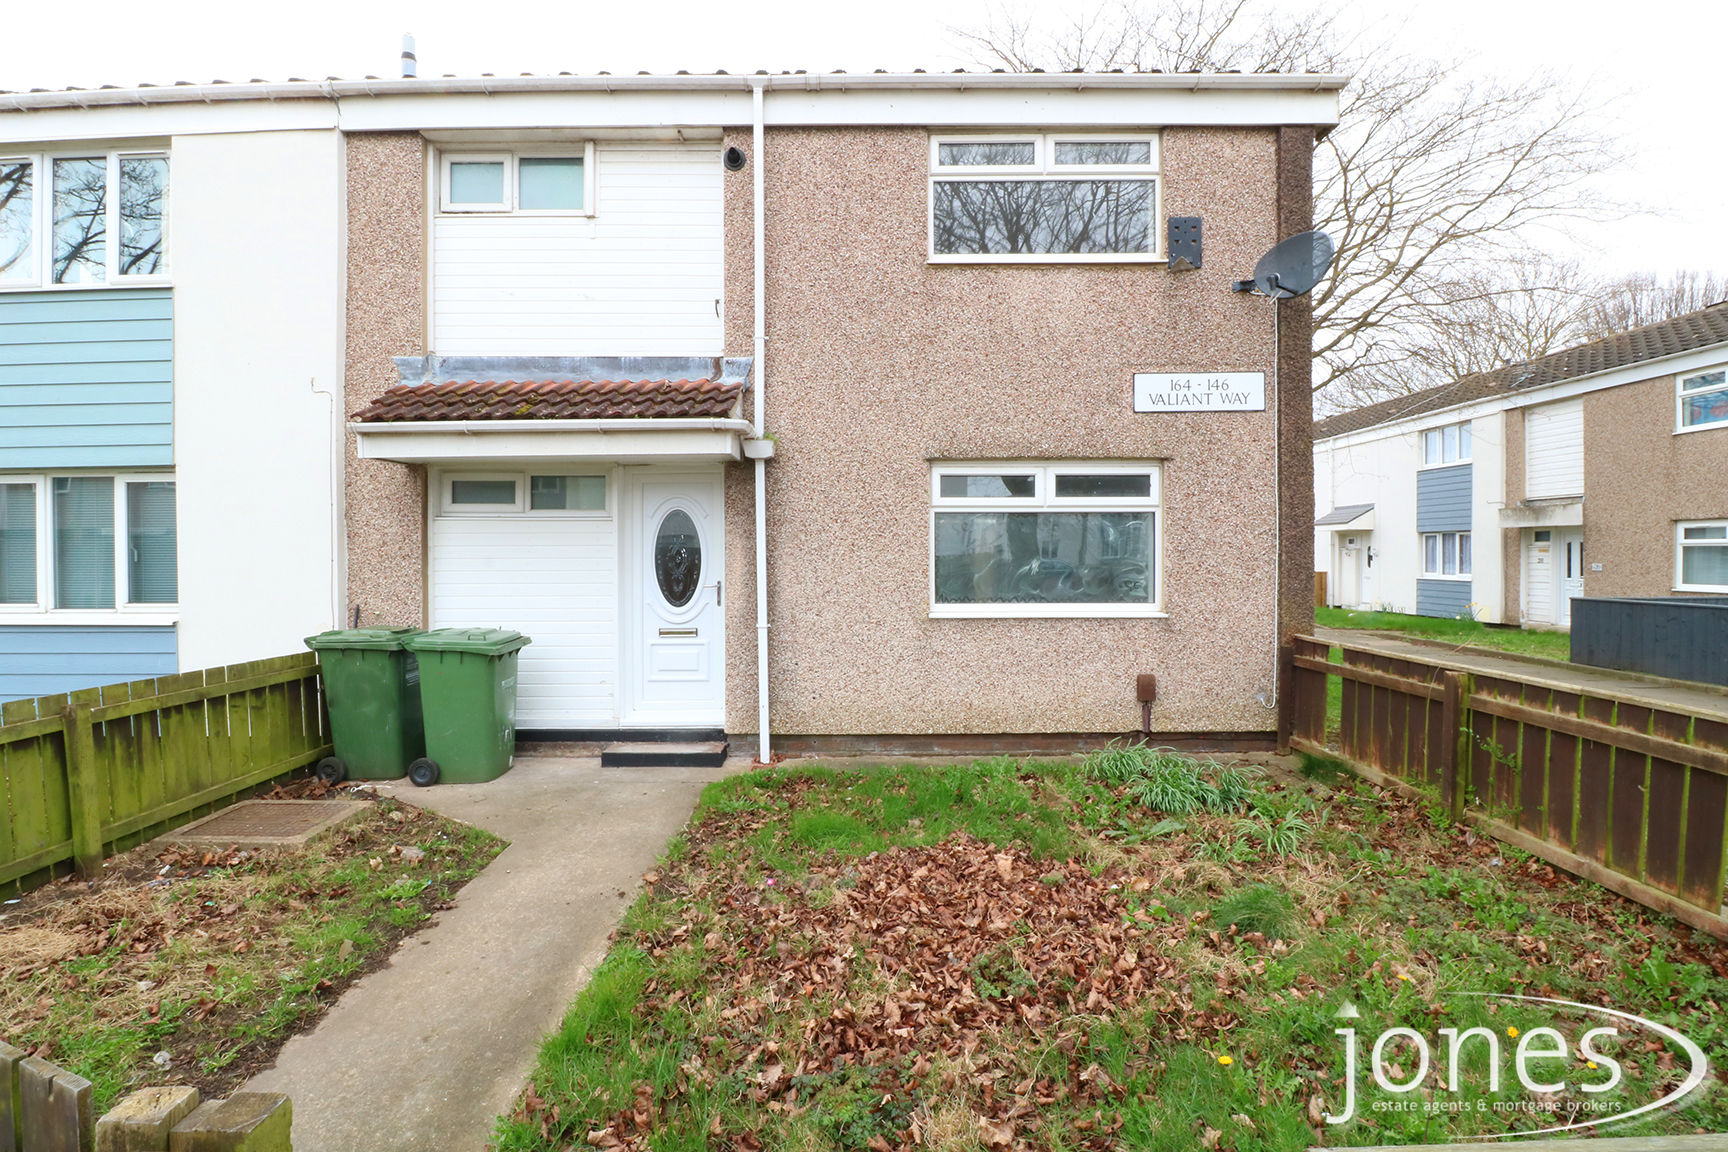 Home for Sale Let - Photo 01 Valiant Way, Thornaby, Stockton on Tees, TS17 9PD